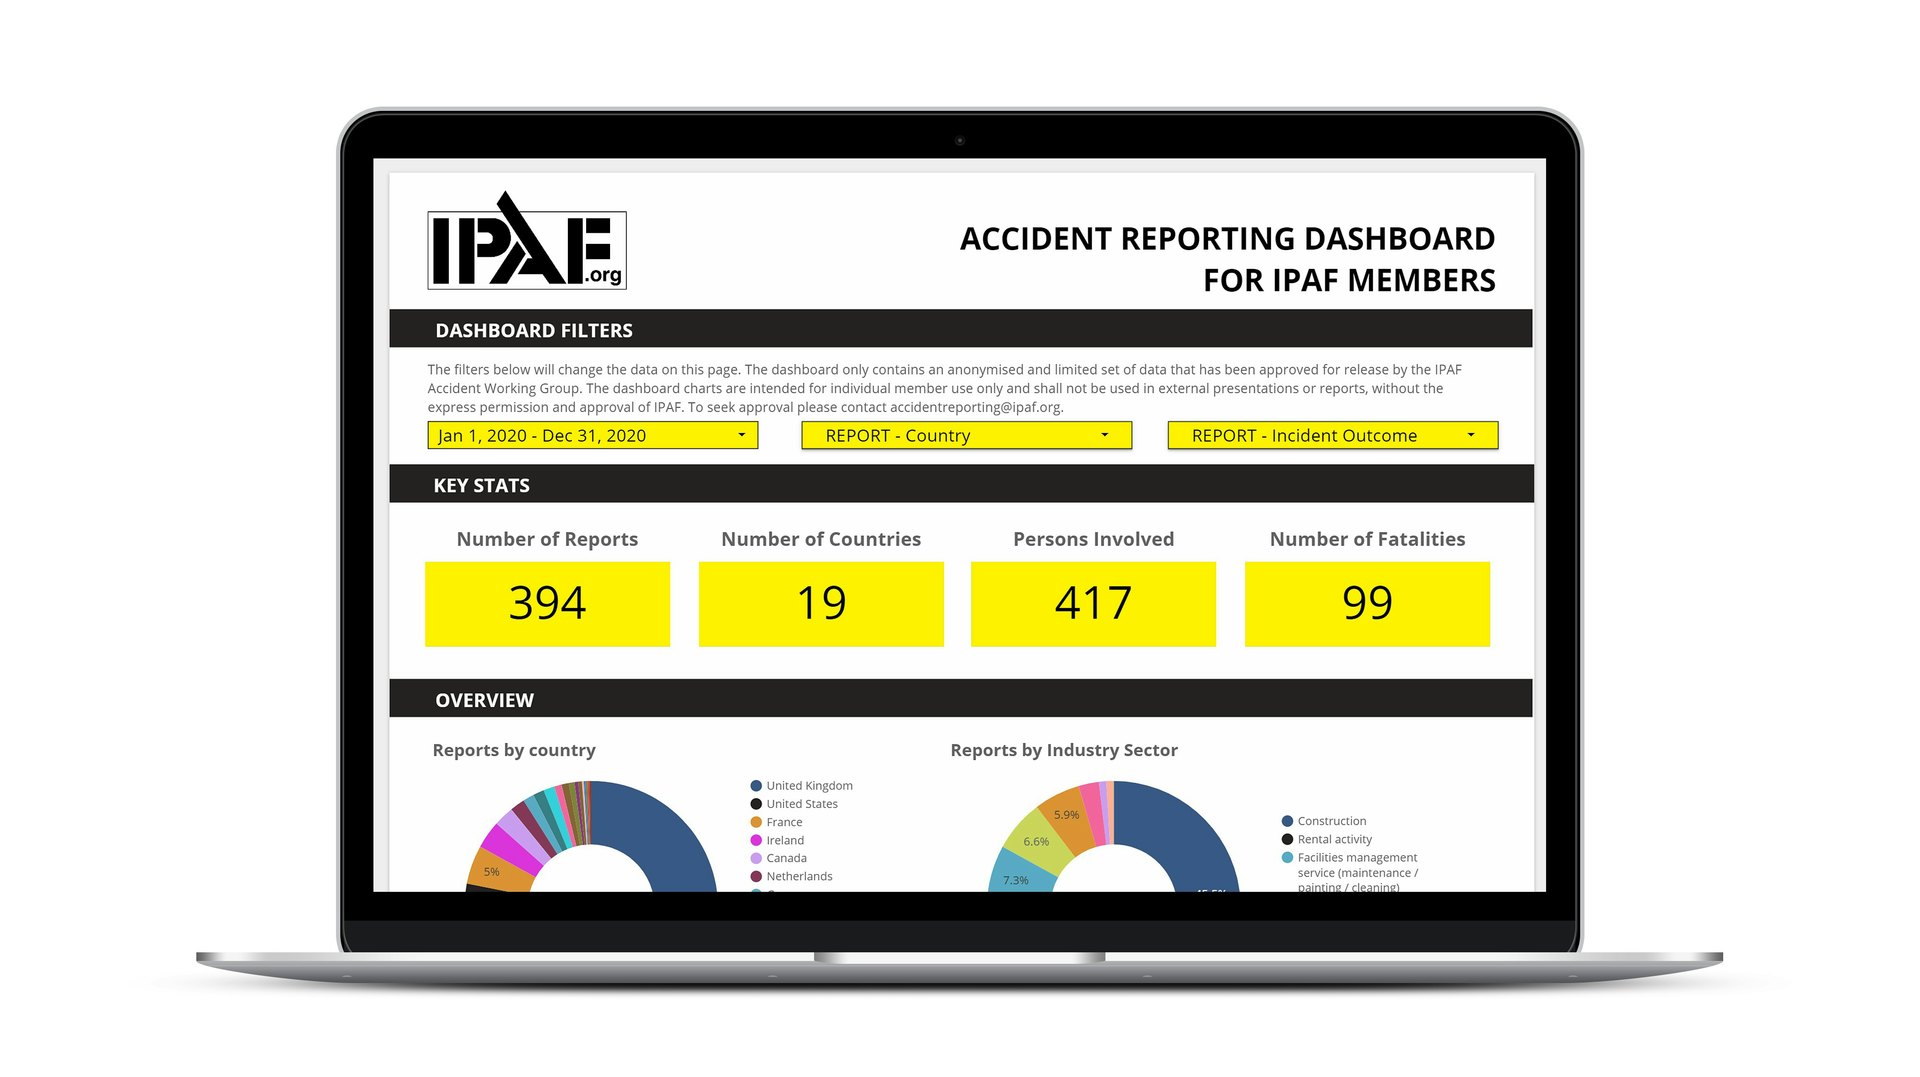 IPAF Member Accident Reporting Dashboard